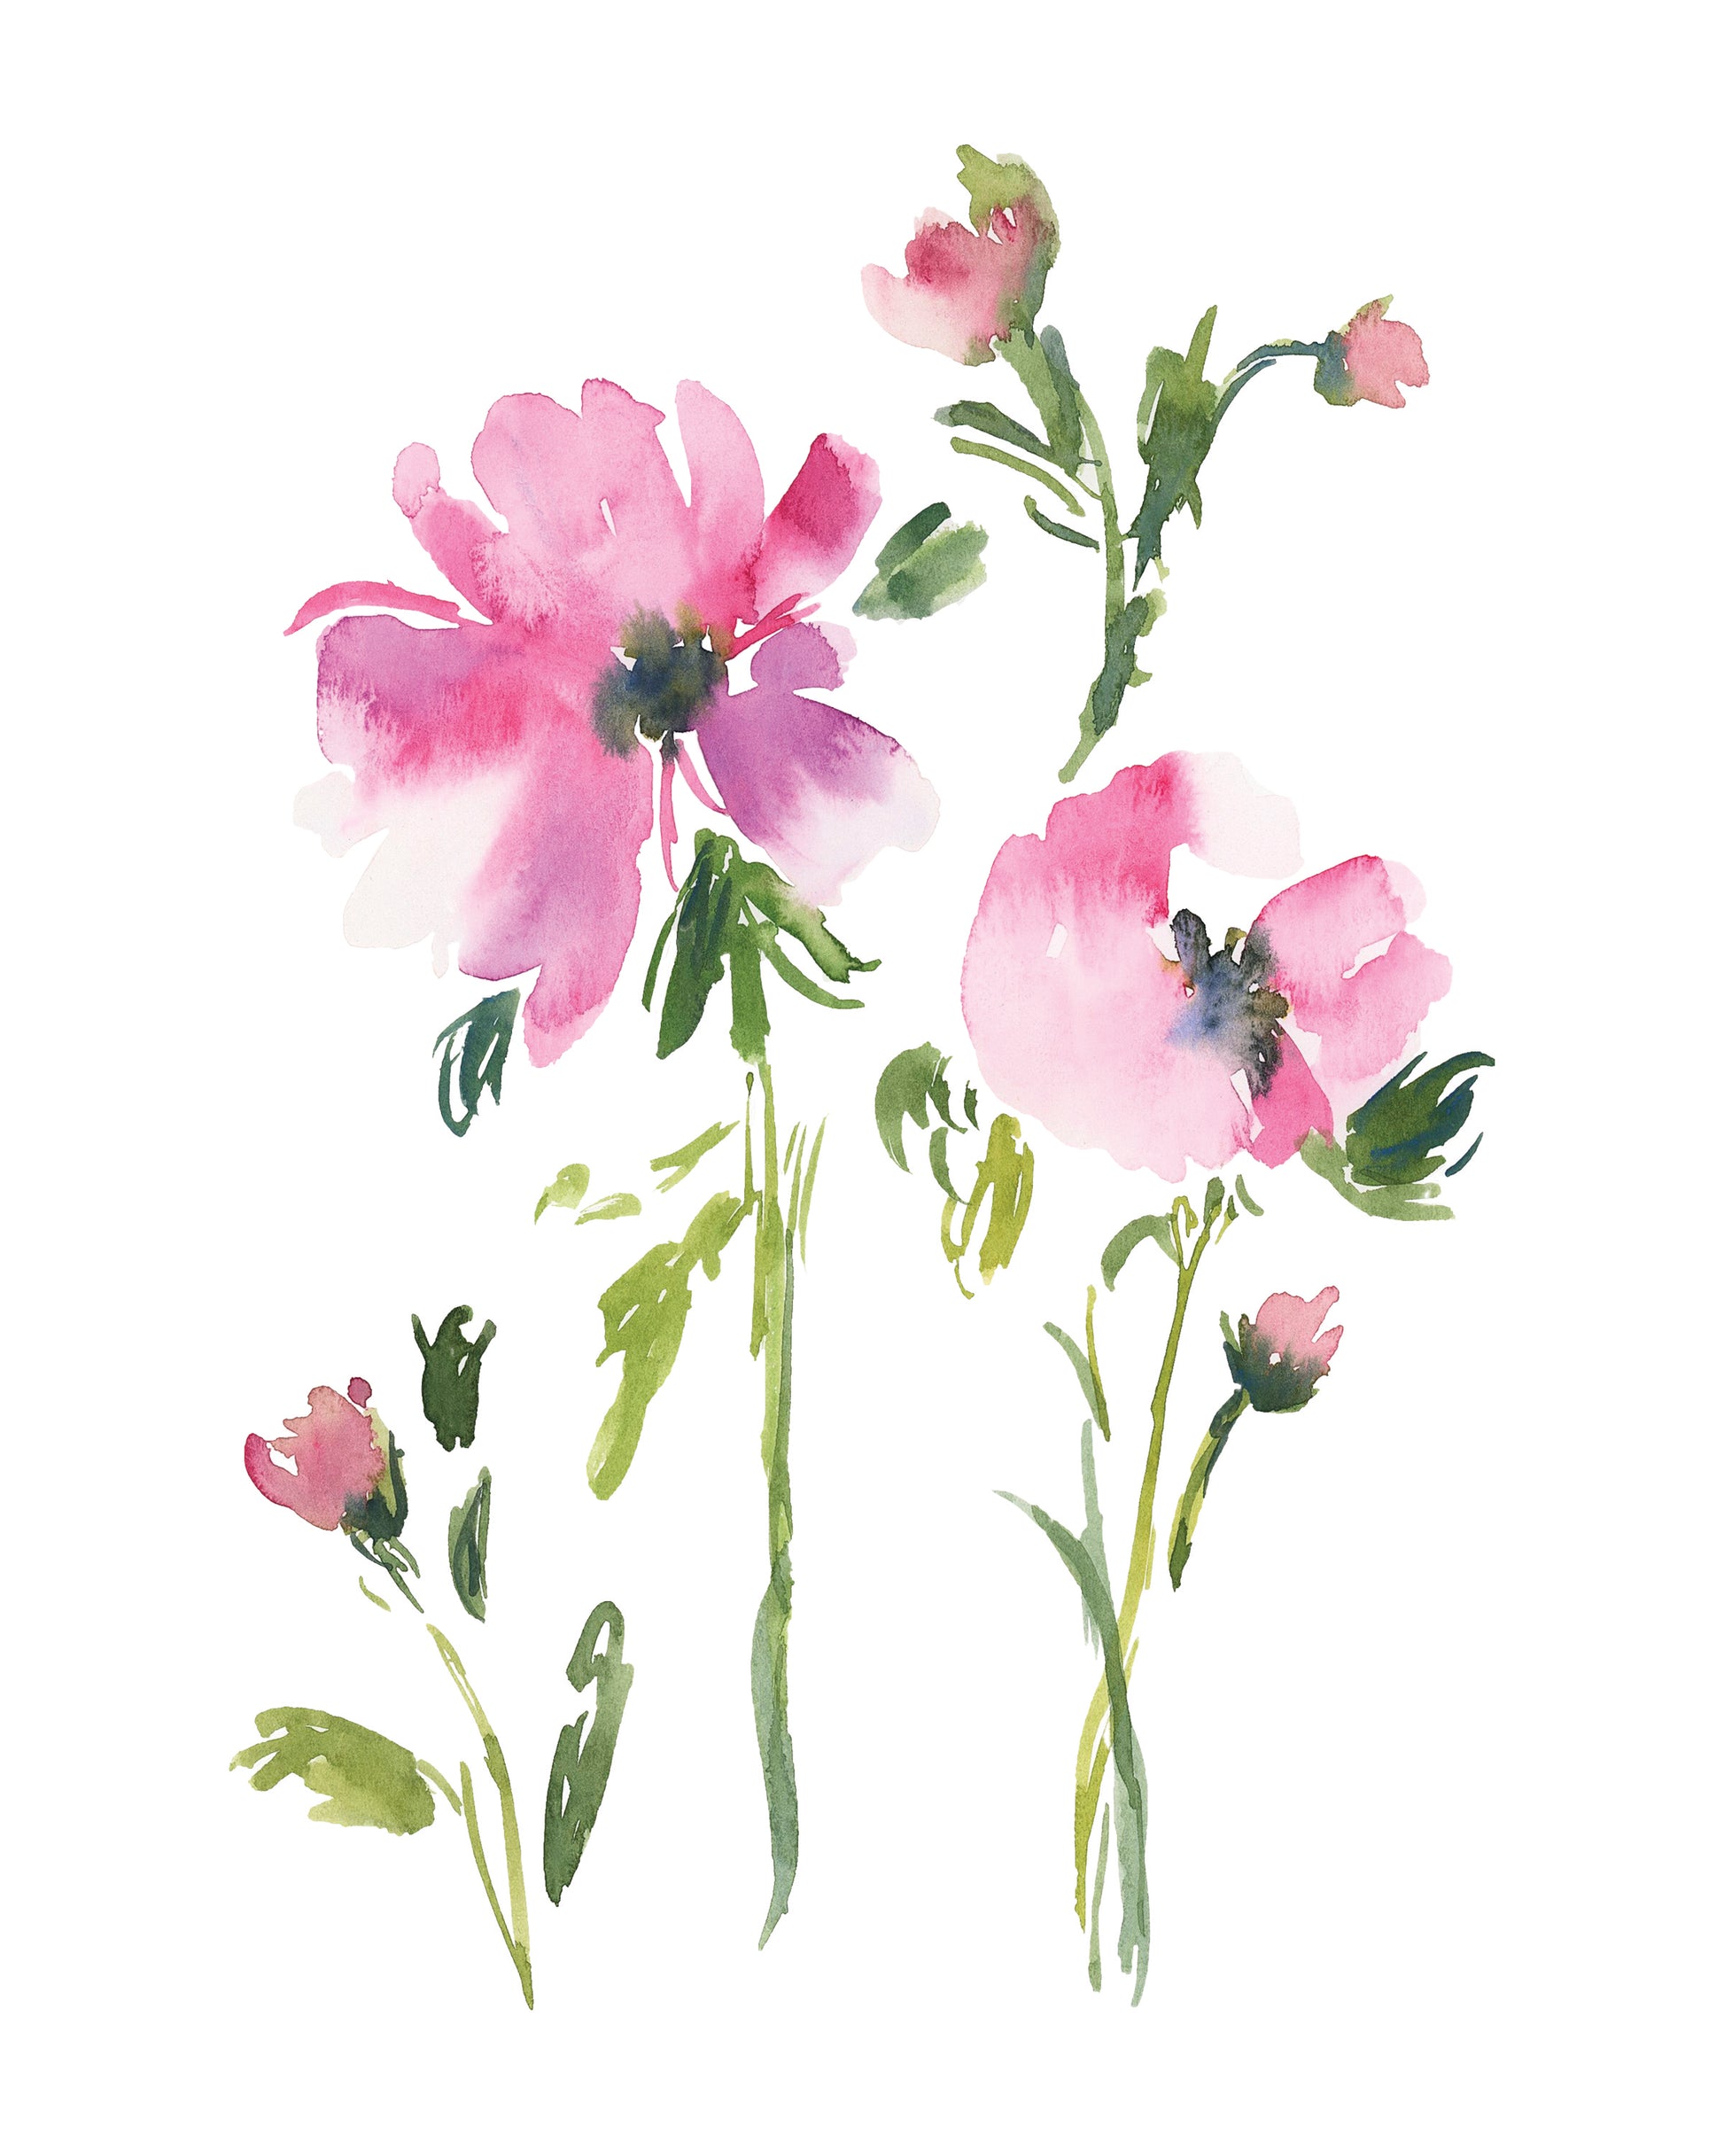 The Ready For Joy Empty Watercolor Palette - Anemones - Unique Shopping for  Artistic Gifts